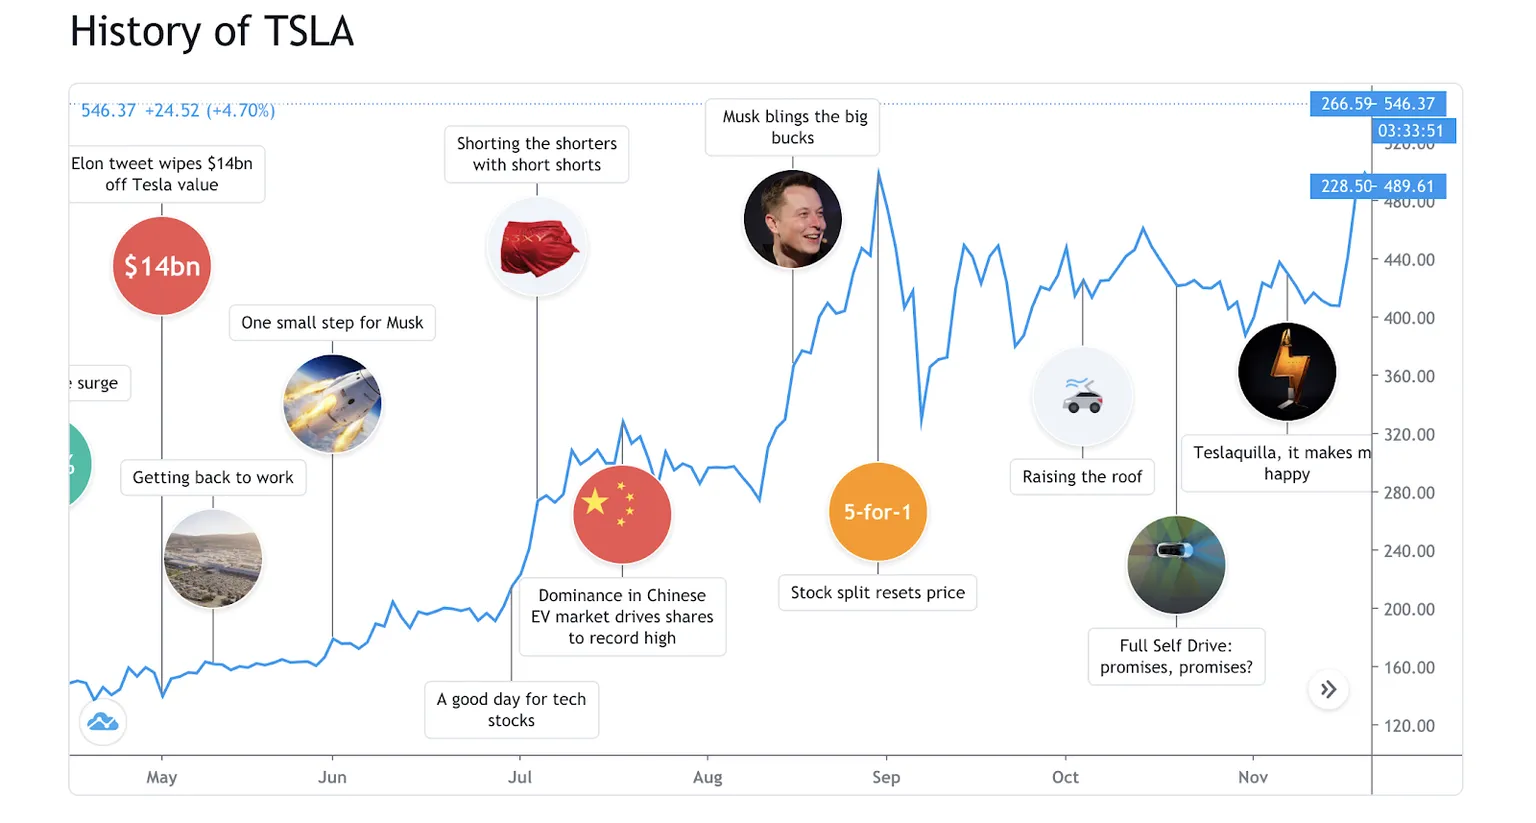 Tesla is the first company to receive its own "timeline" on TradingView